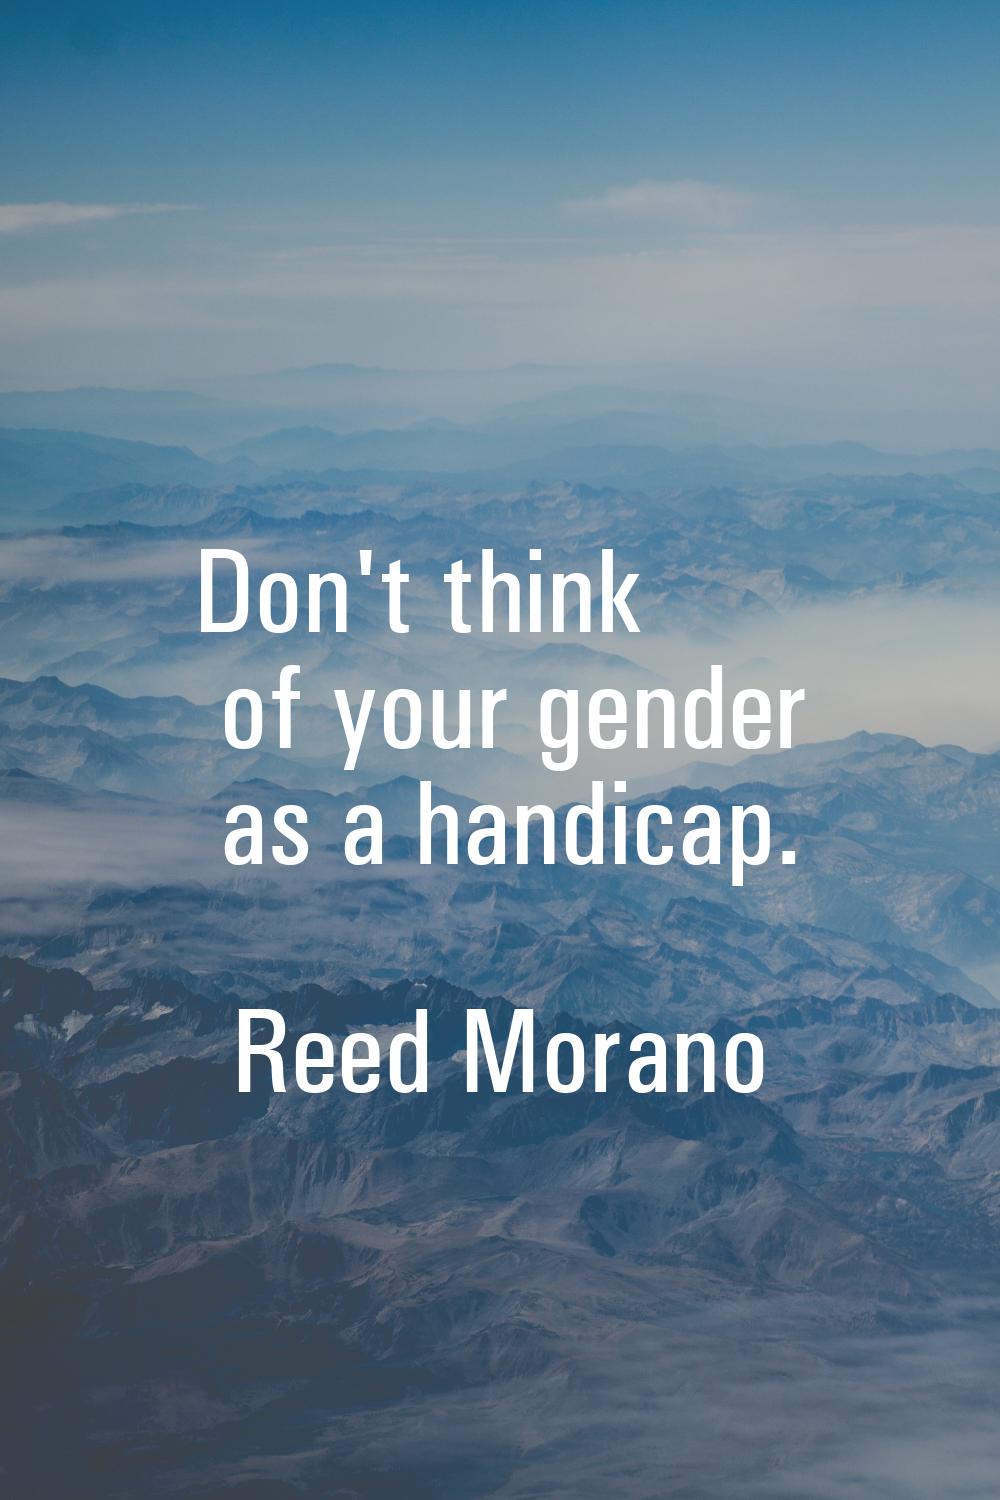 Don't think of your gender as a handicap.